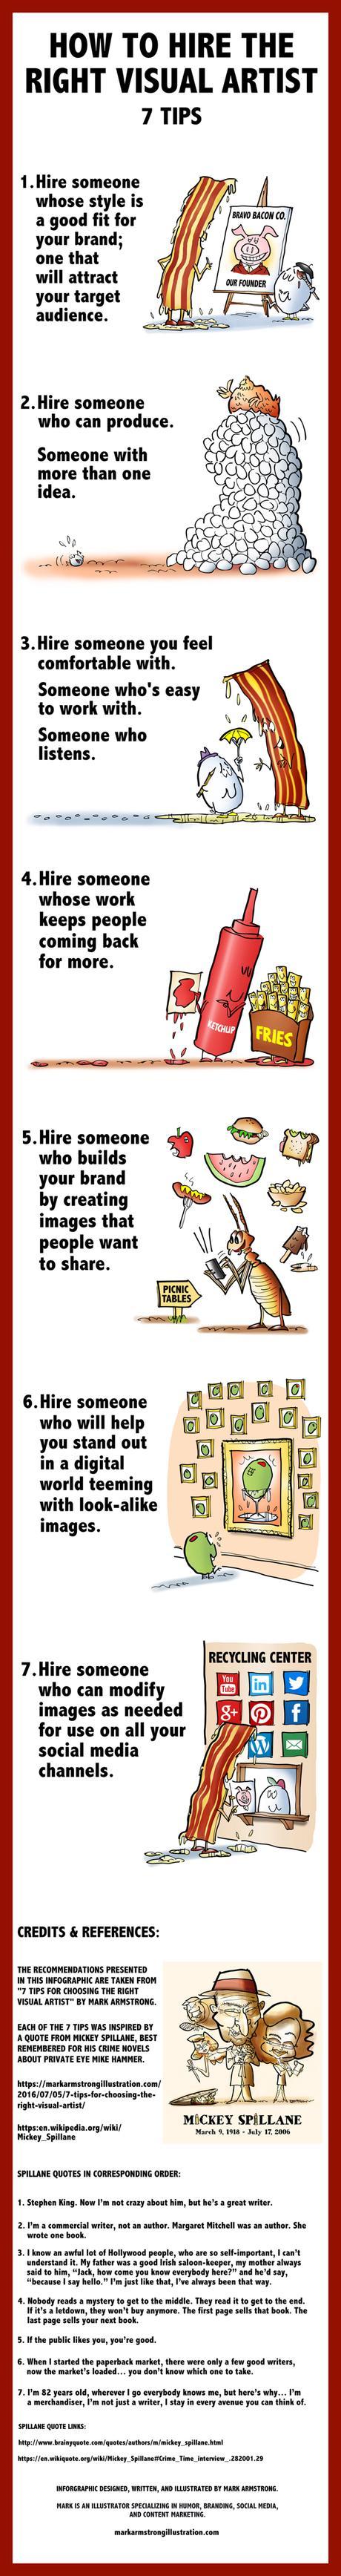 Infographic how to choose the right visual artist good fit for brand someone who listens images people want to share help stand out get noticed modify images for all social media platforms base on Mickey Spillane quotes